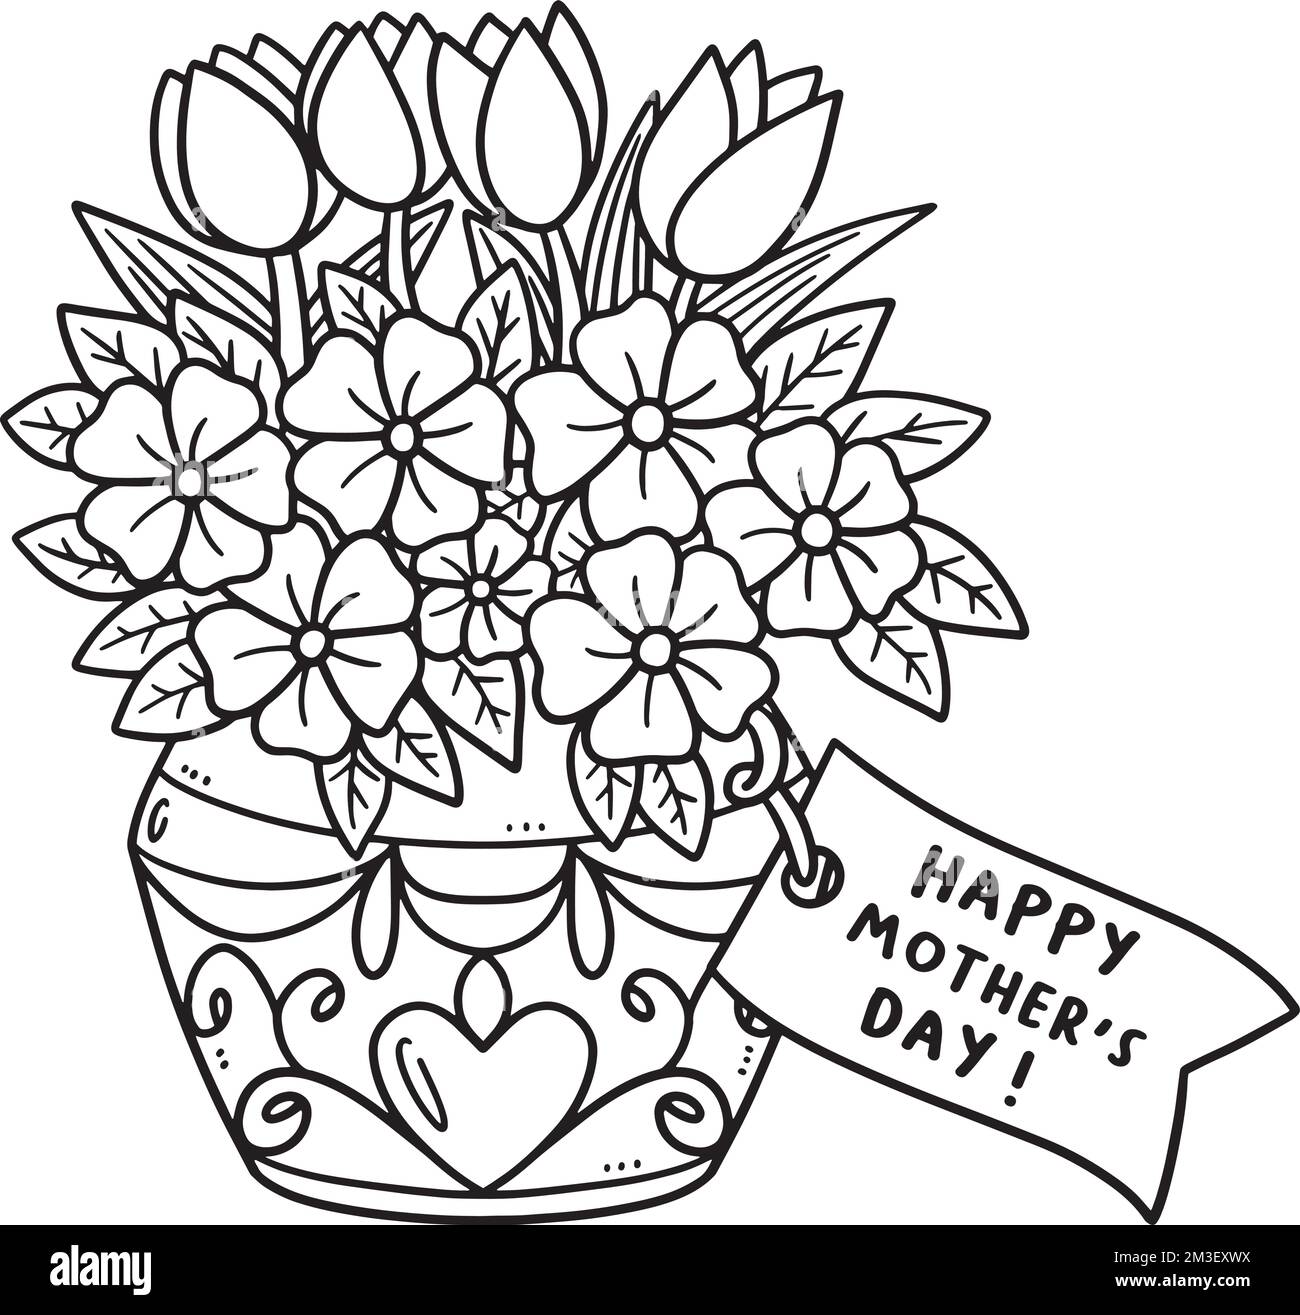 Mothers Day Flowers and Greeting Card Isolated  Stock Vector